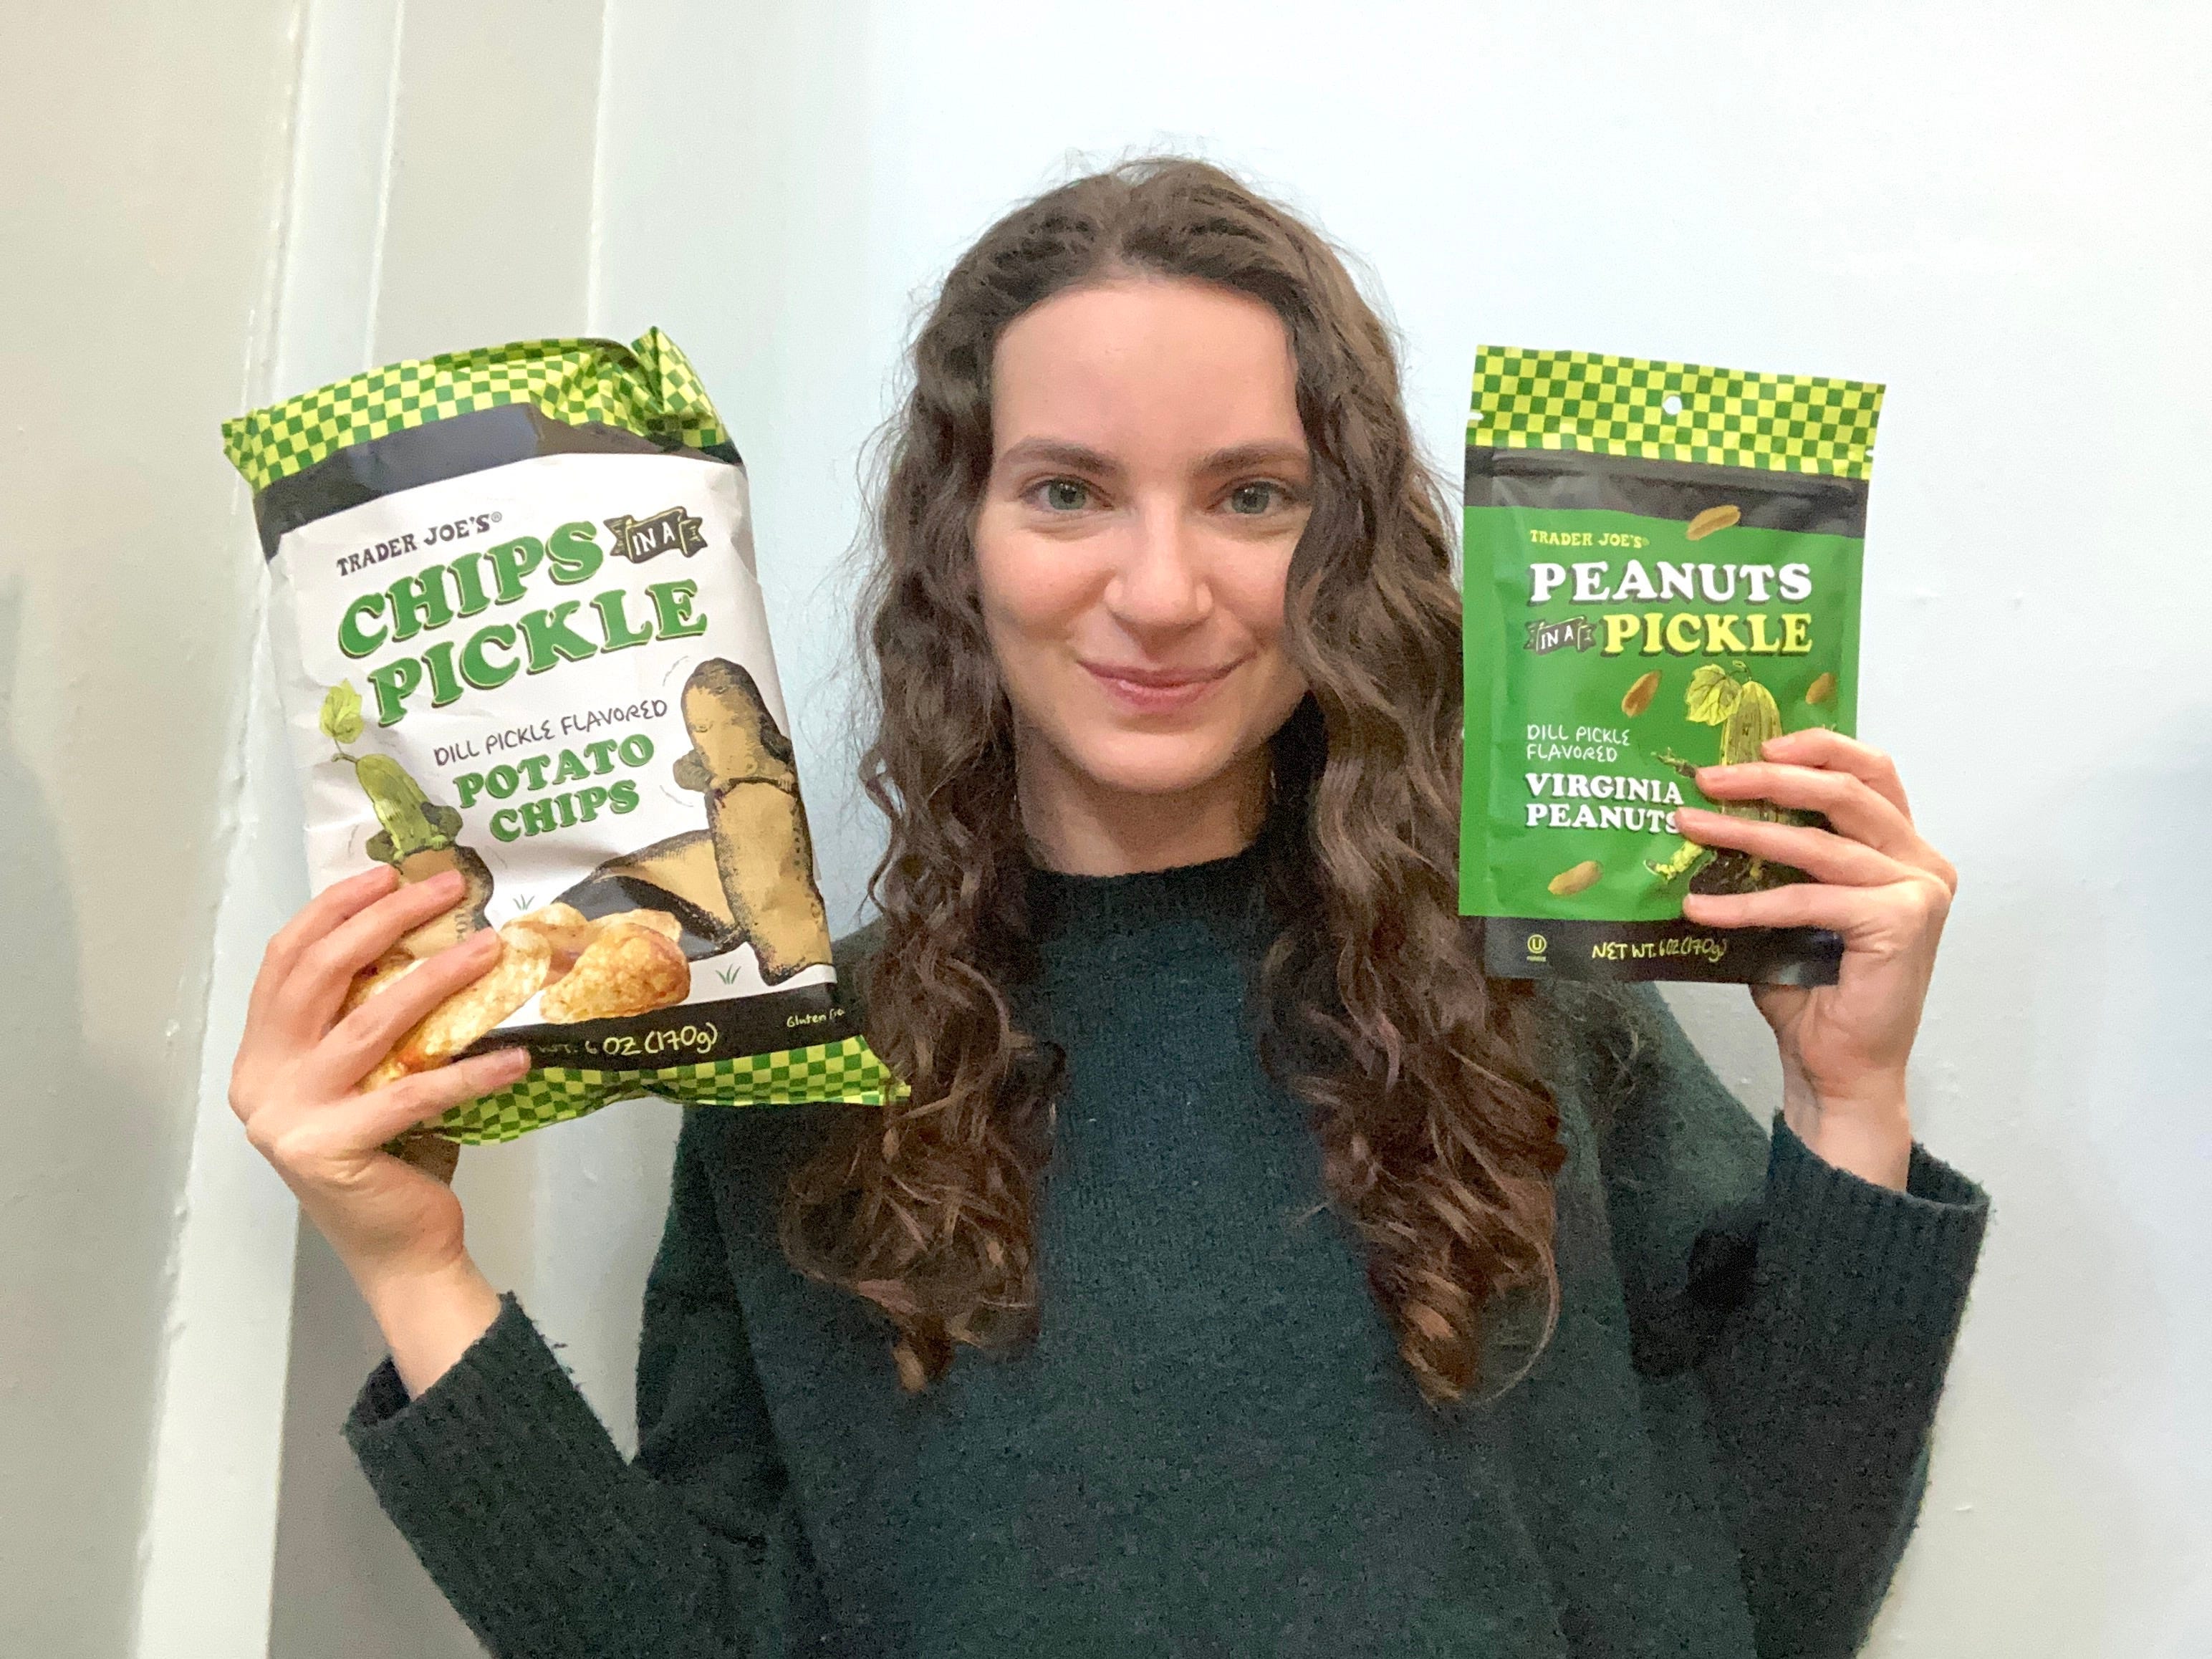 I tried 3 pickle-flavored products from Trader Joe's and the